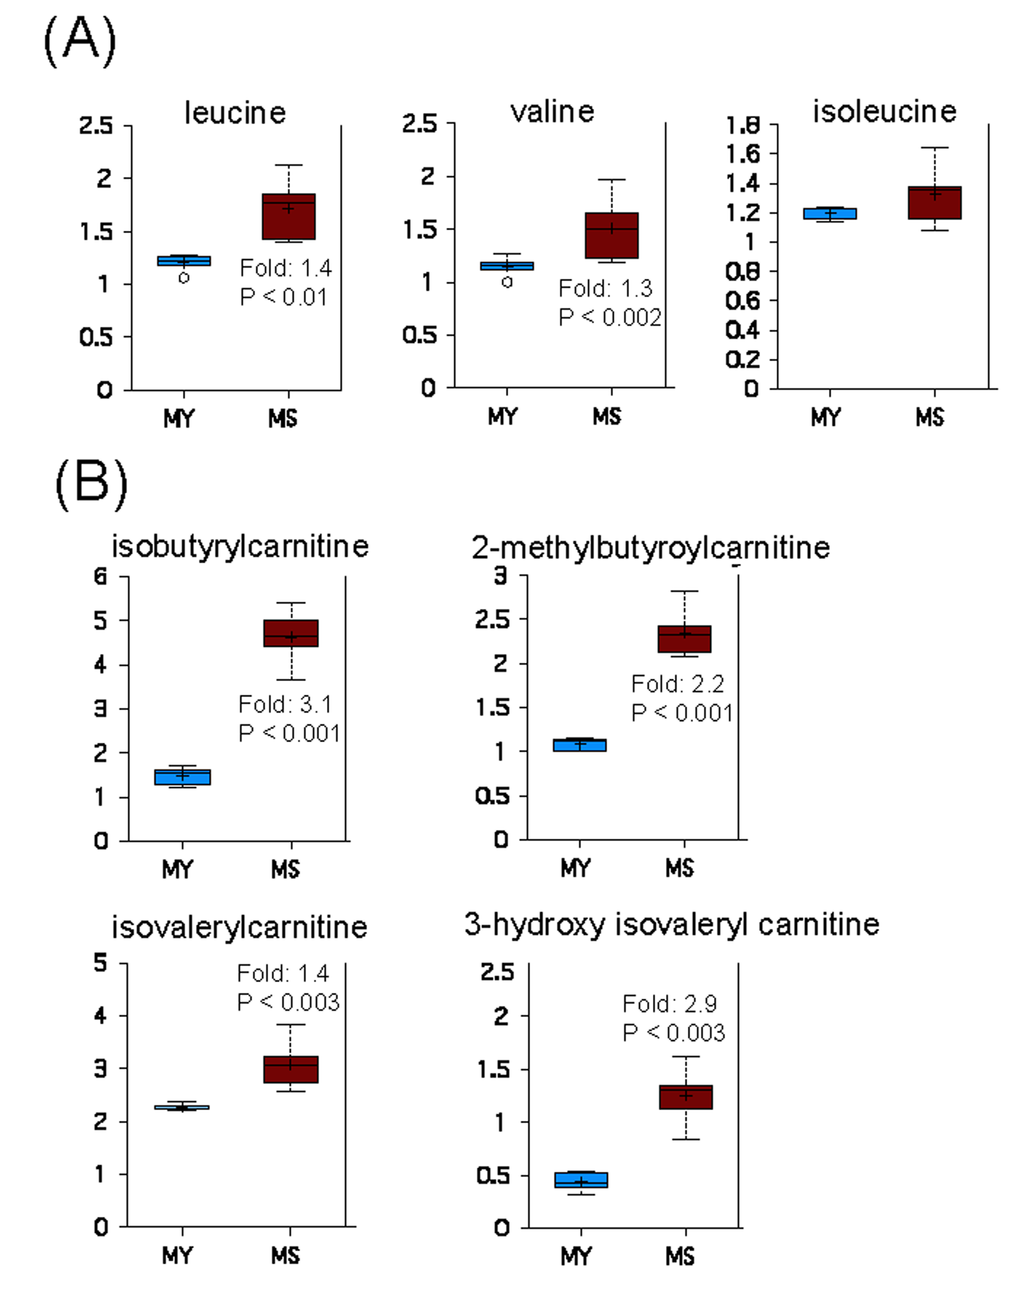 Catabolism of BCAAs is increased during replicative senescence. (A) Relative levels of branched chain amino acids in young (MY) and senescent (MS) myoblasts. (B) Carnitine conjugates of BCAA-derived biochemicals. For details of box plots see Figure legend 4.